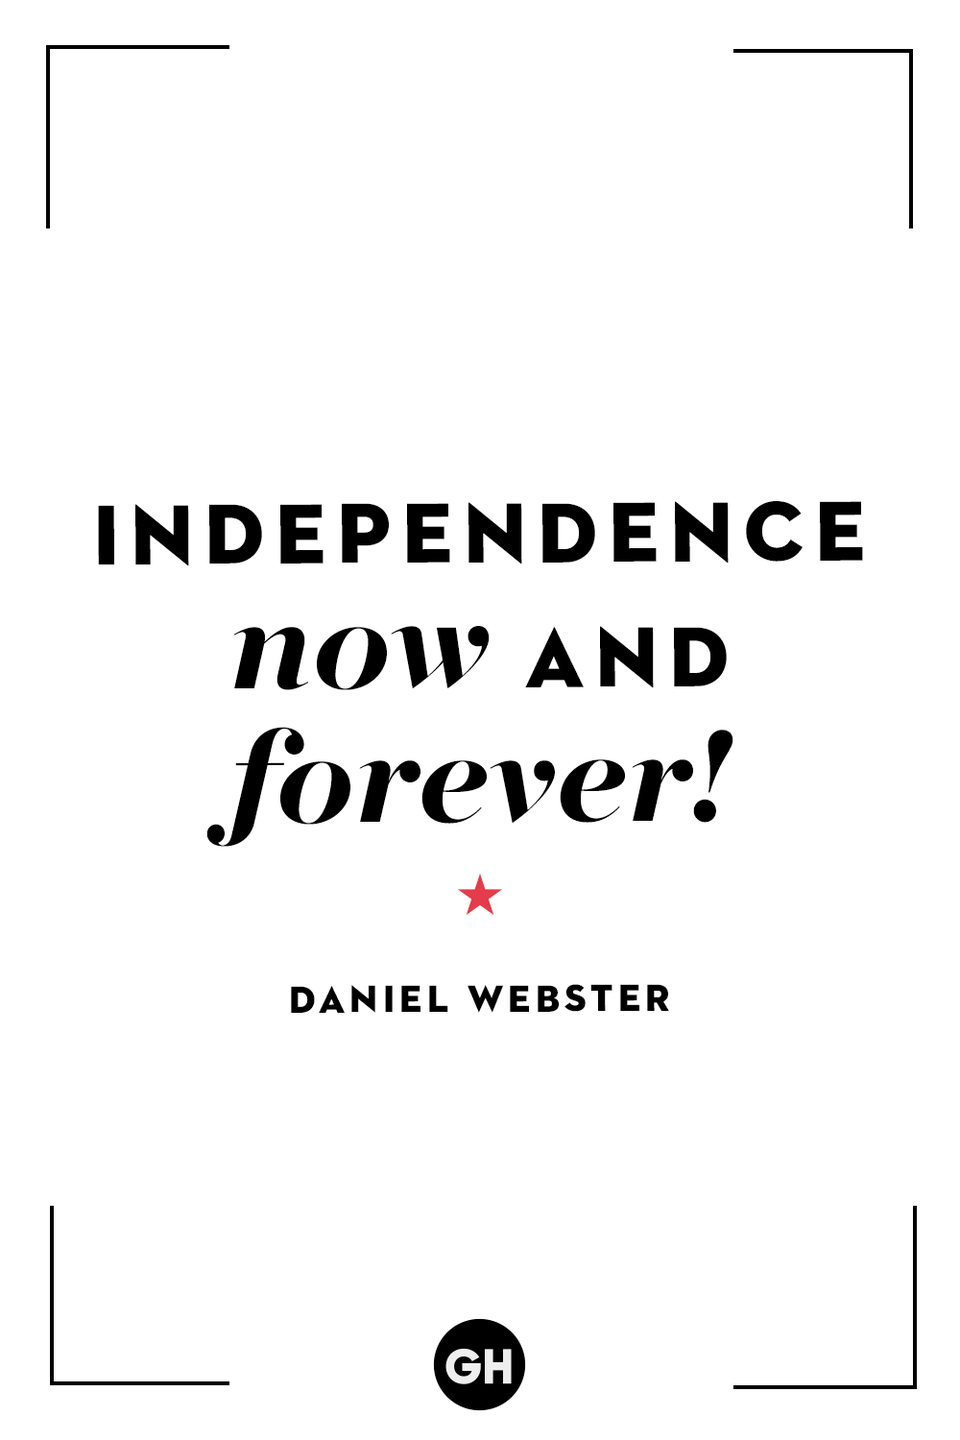 <p>Independence now and forever!</p>